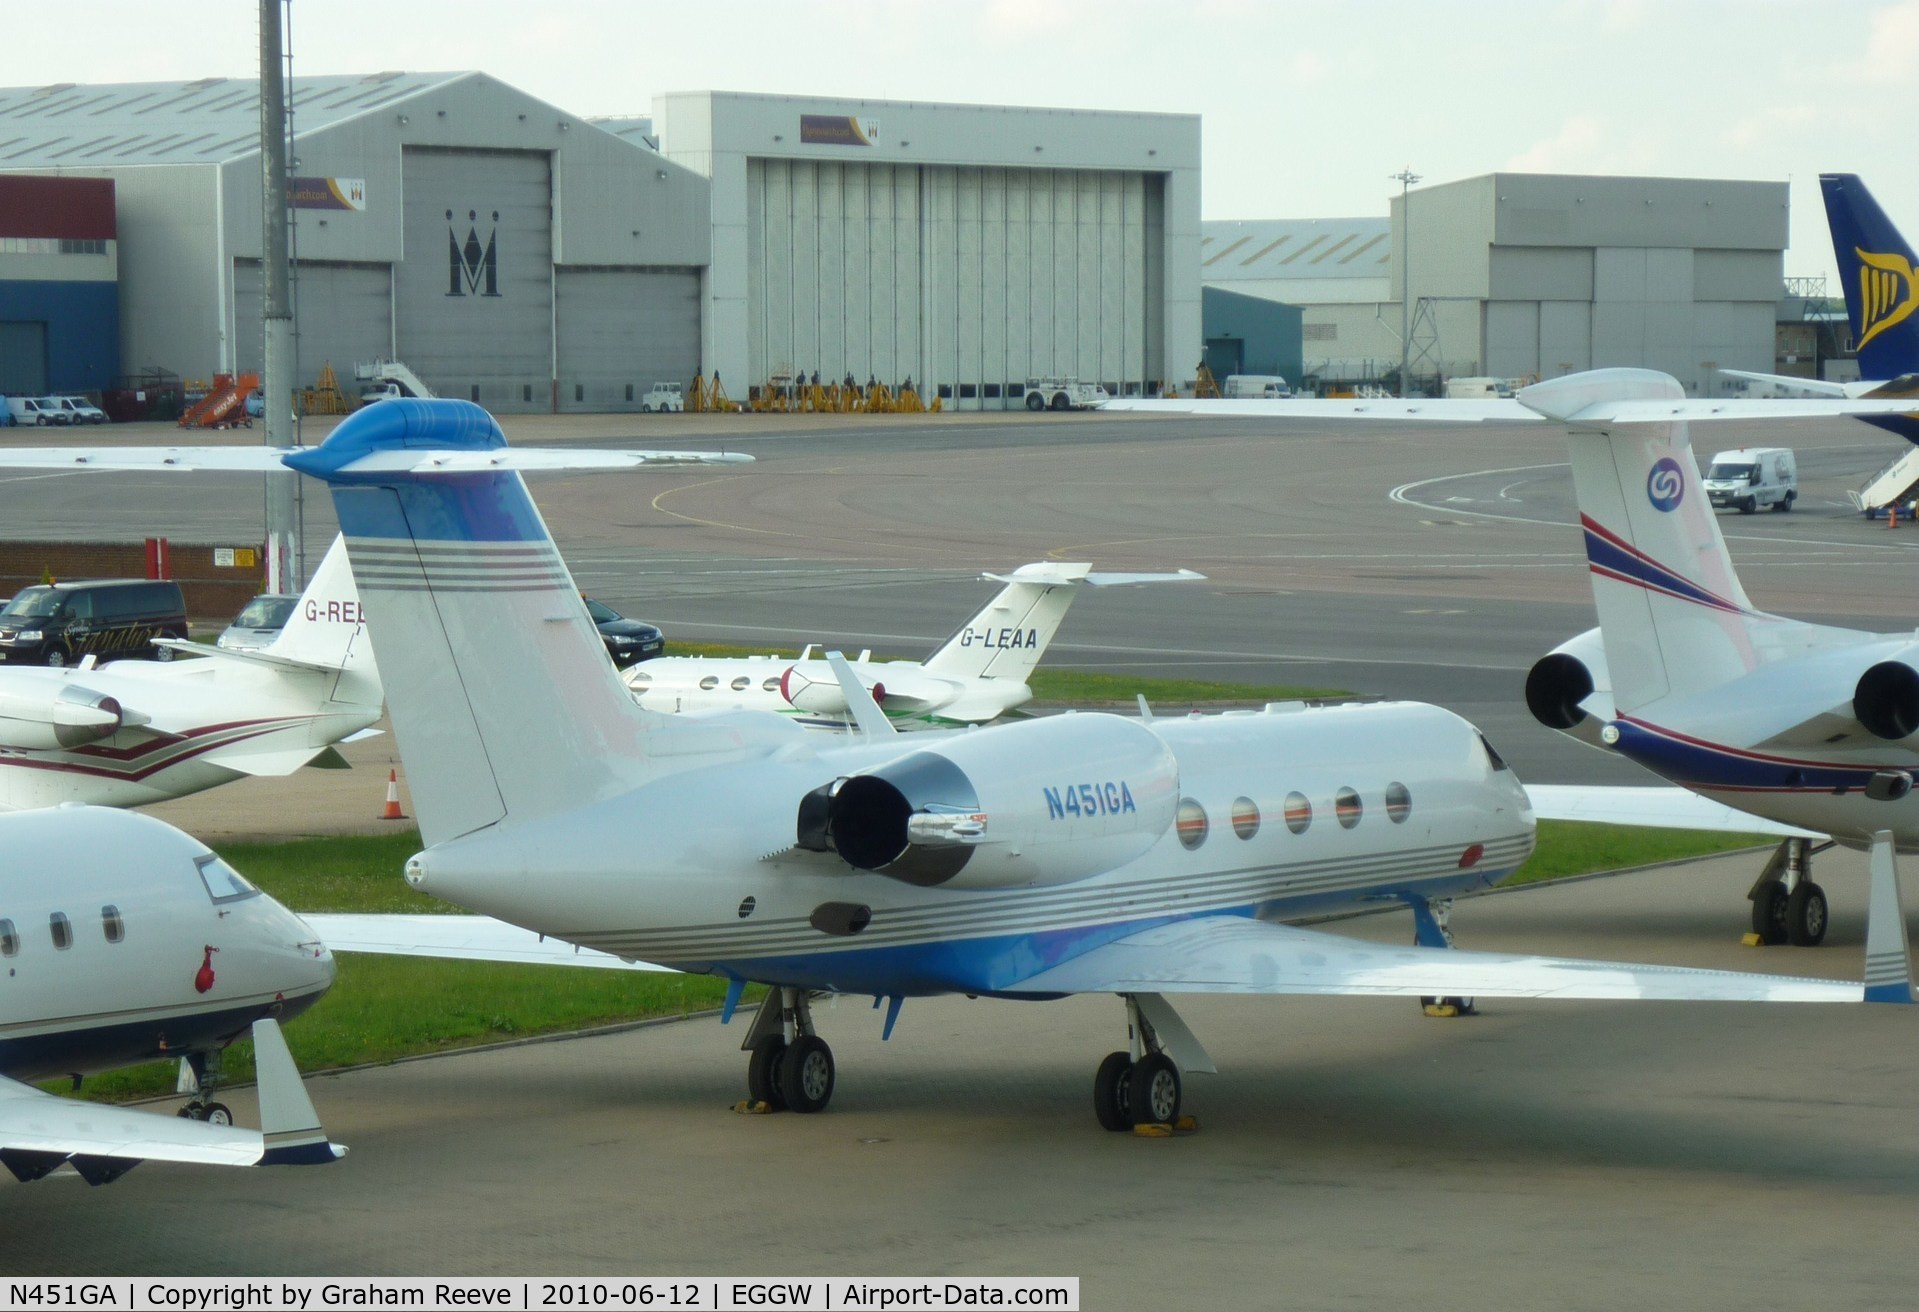 N451GA, 1993 Gulfstream Aerospace G-IV C/N 1221, Parked at the rear of a hotel at Luton Airport.